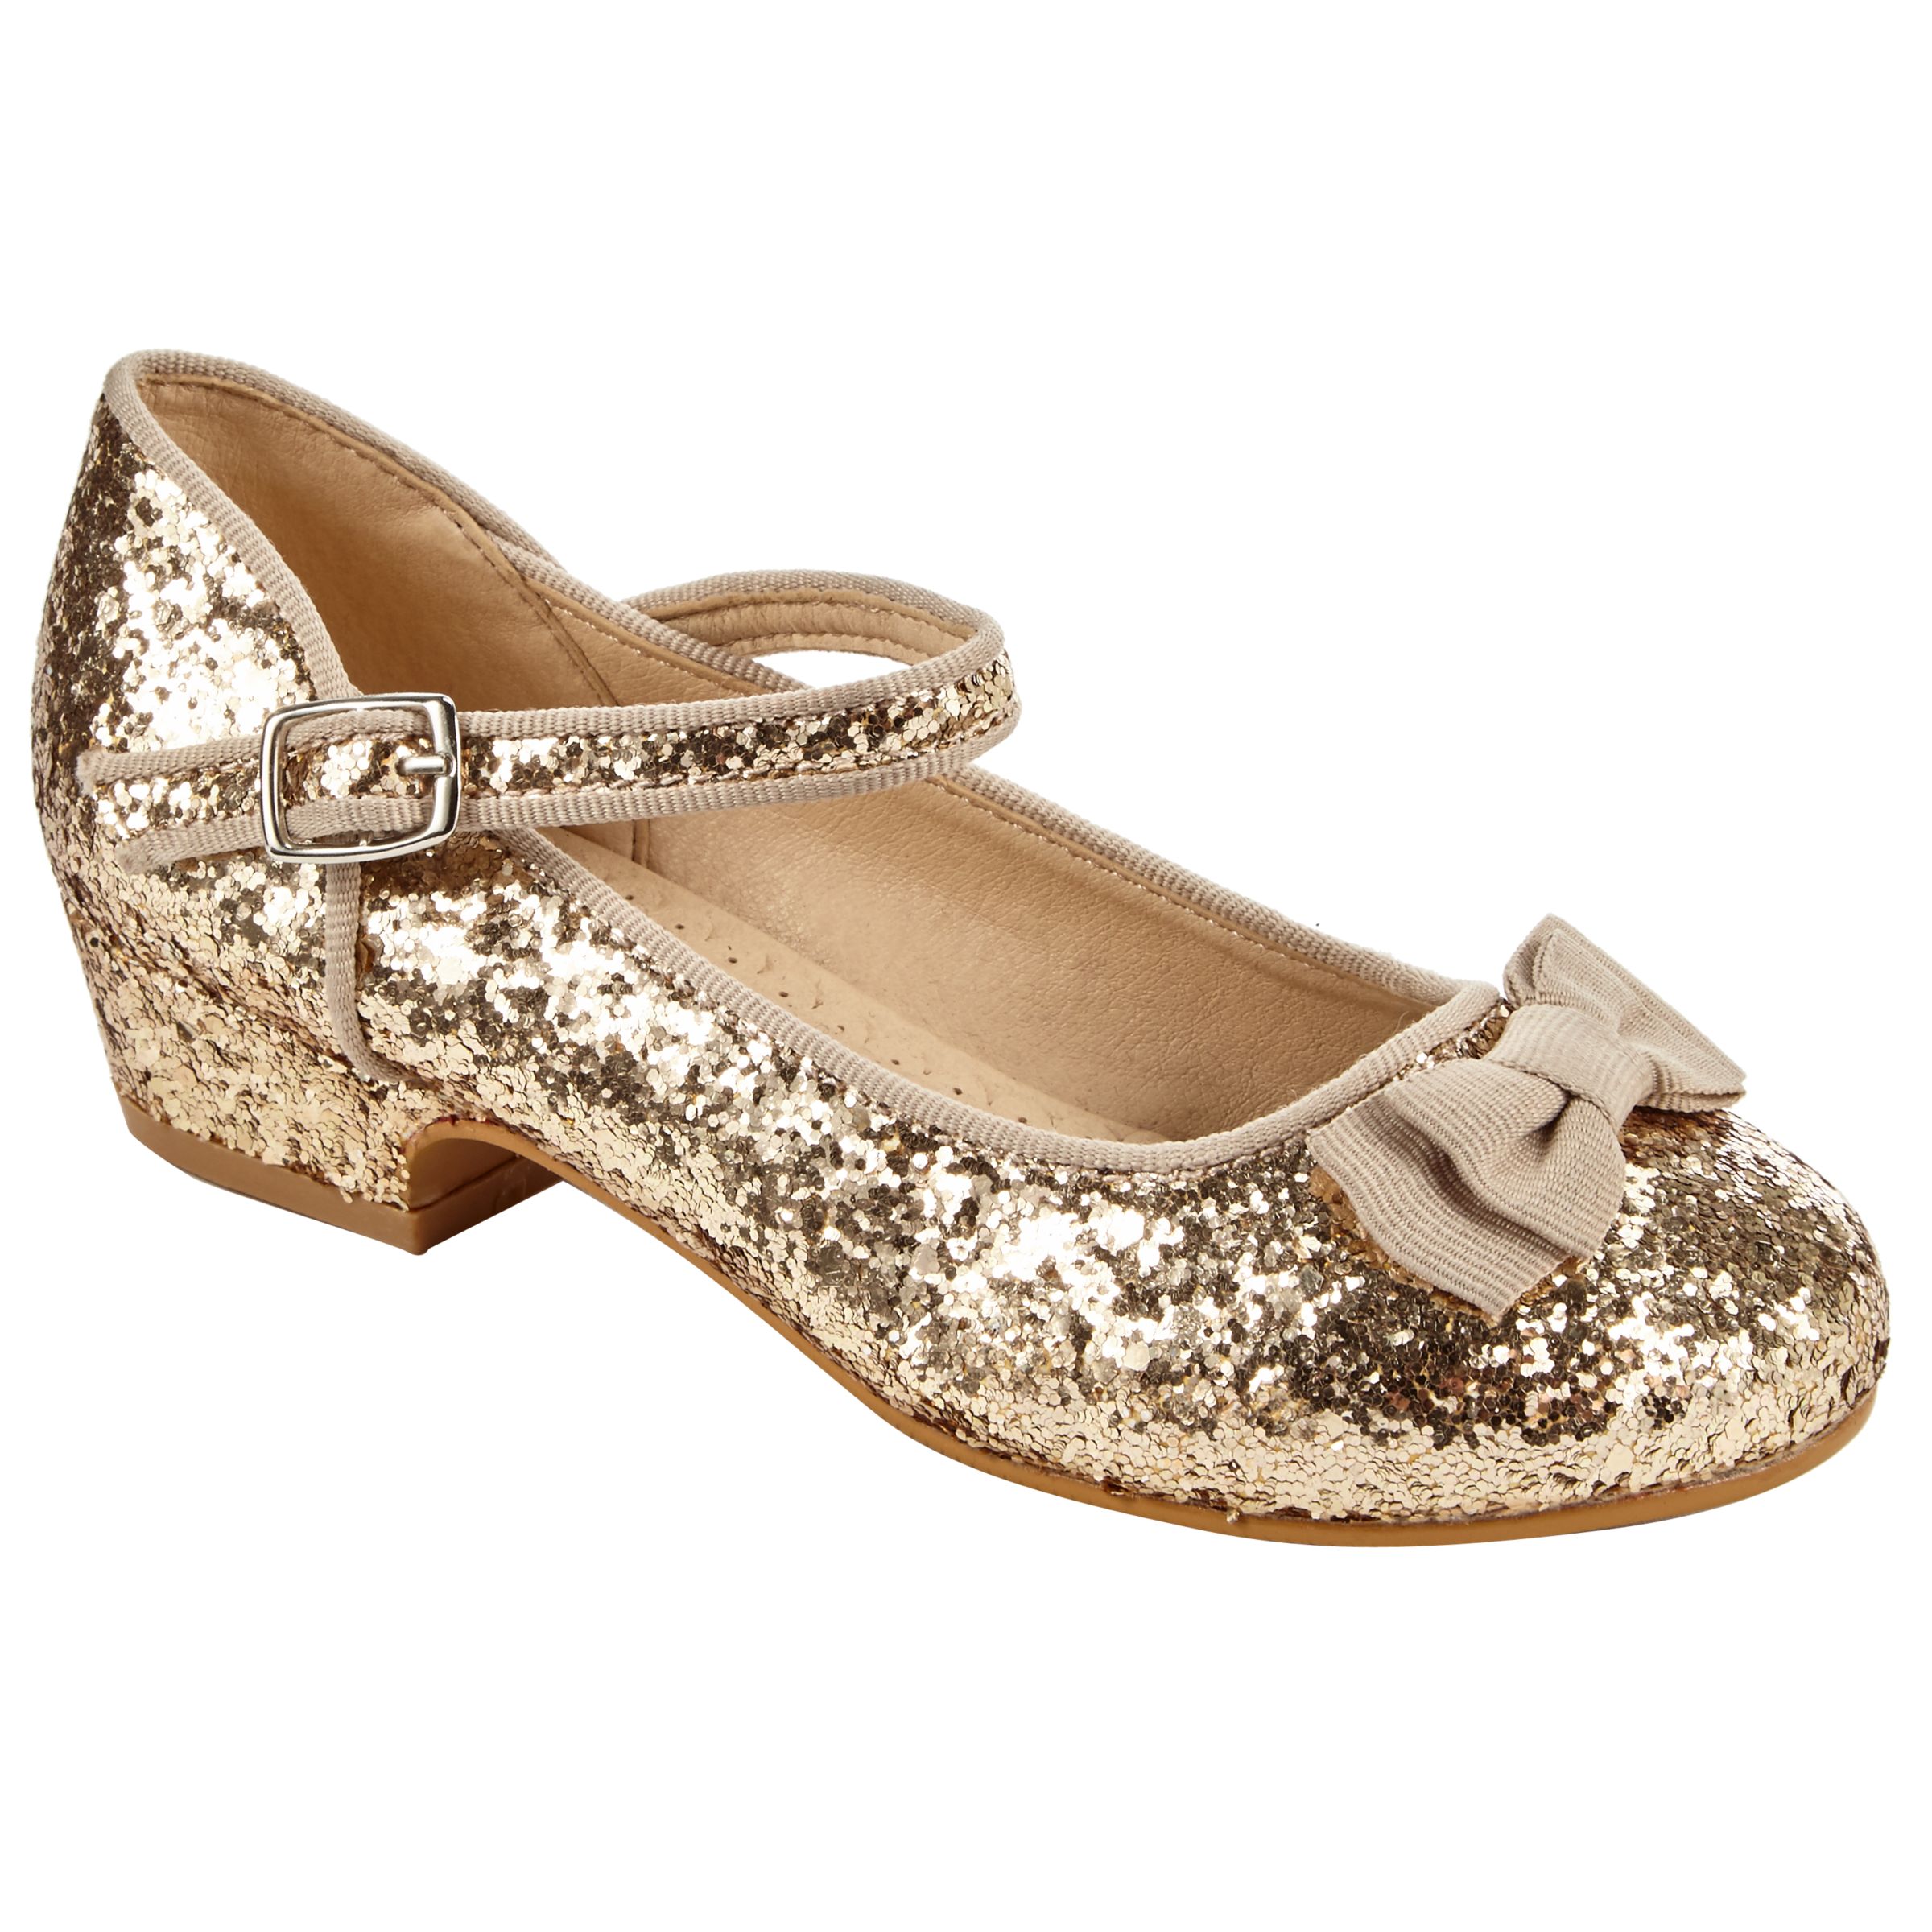 children's sparkly shoes with heels